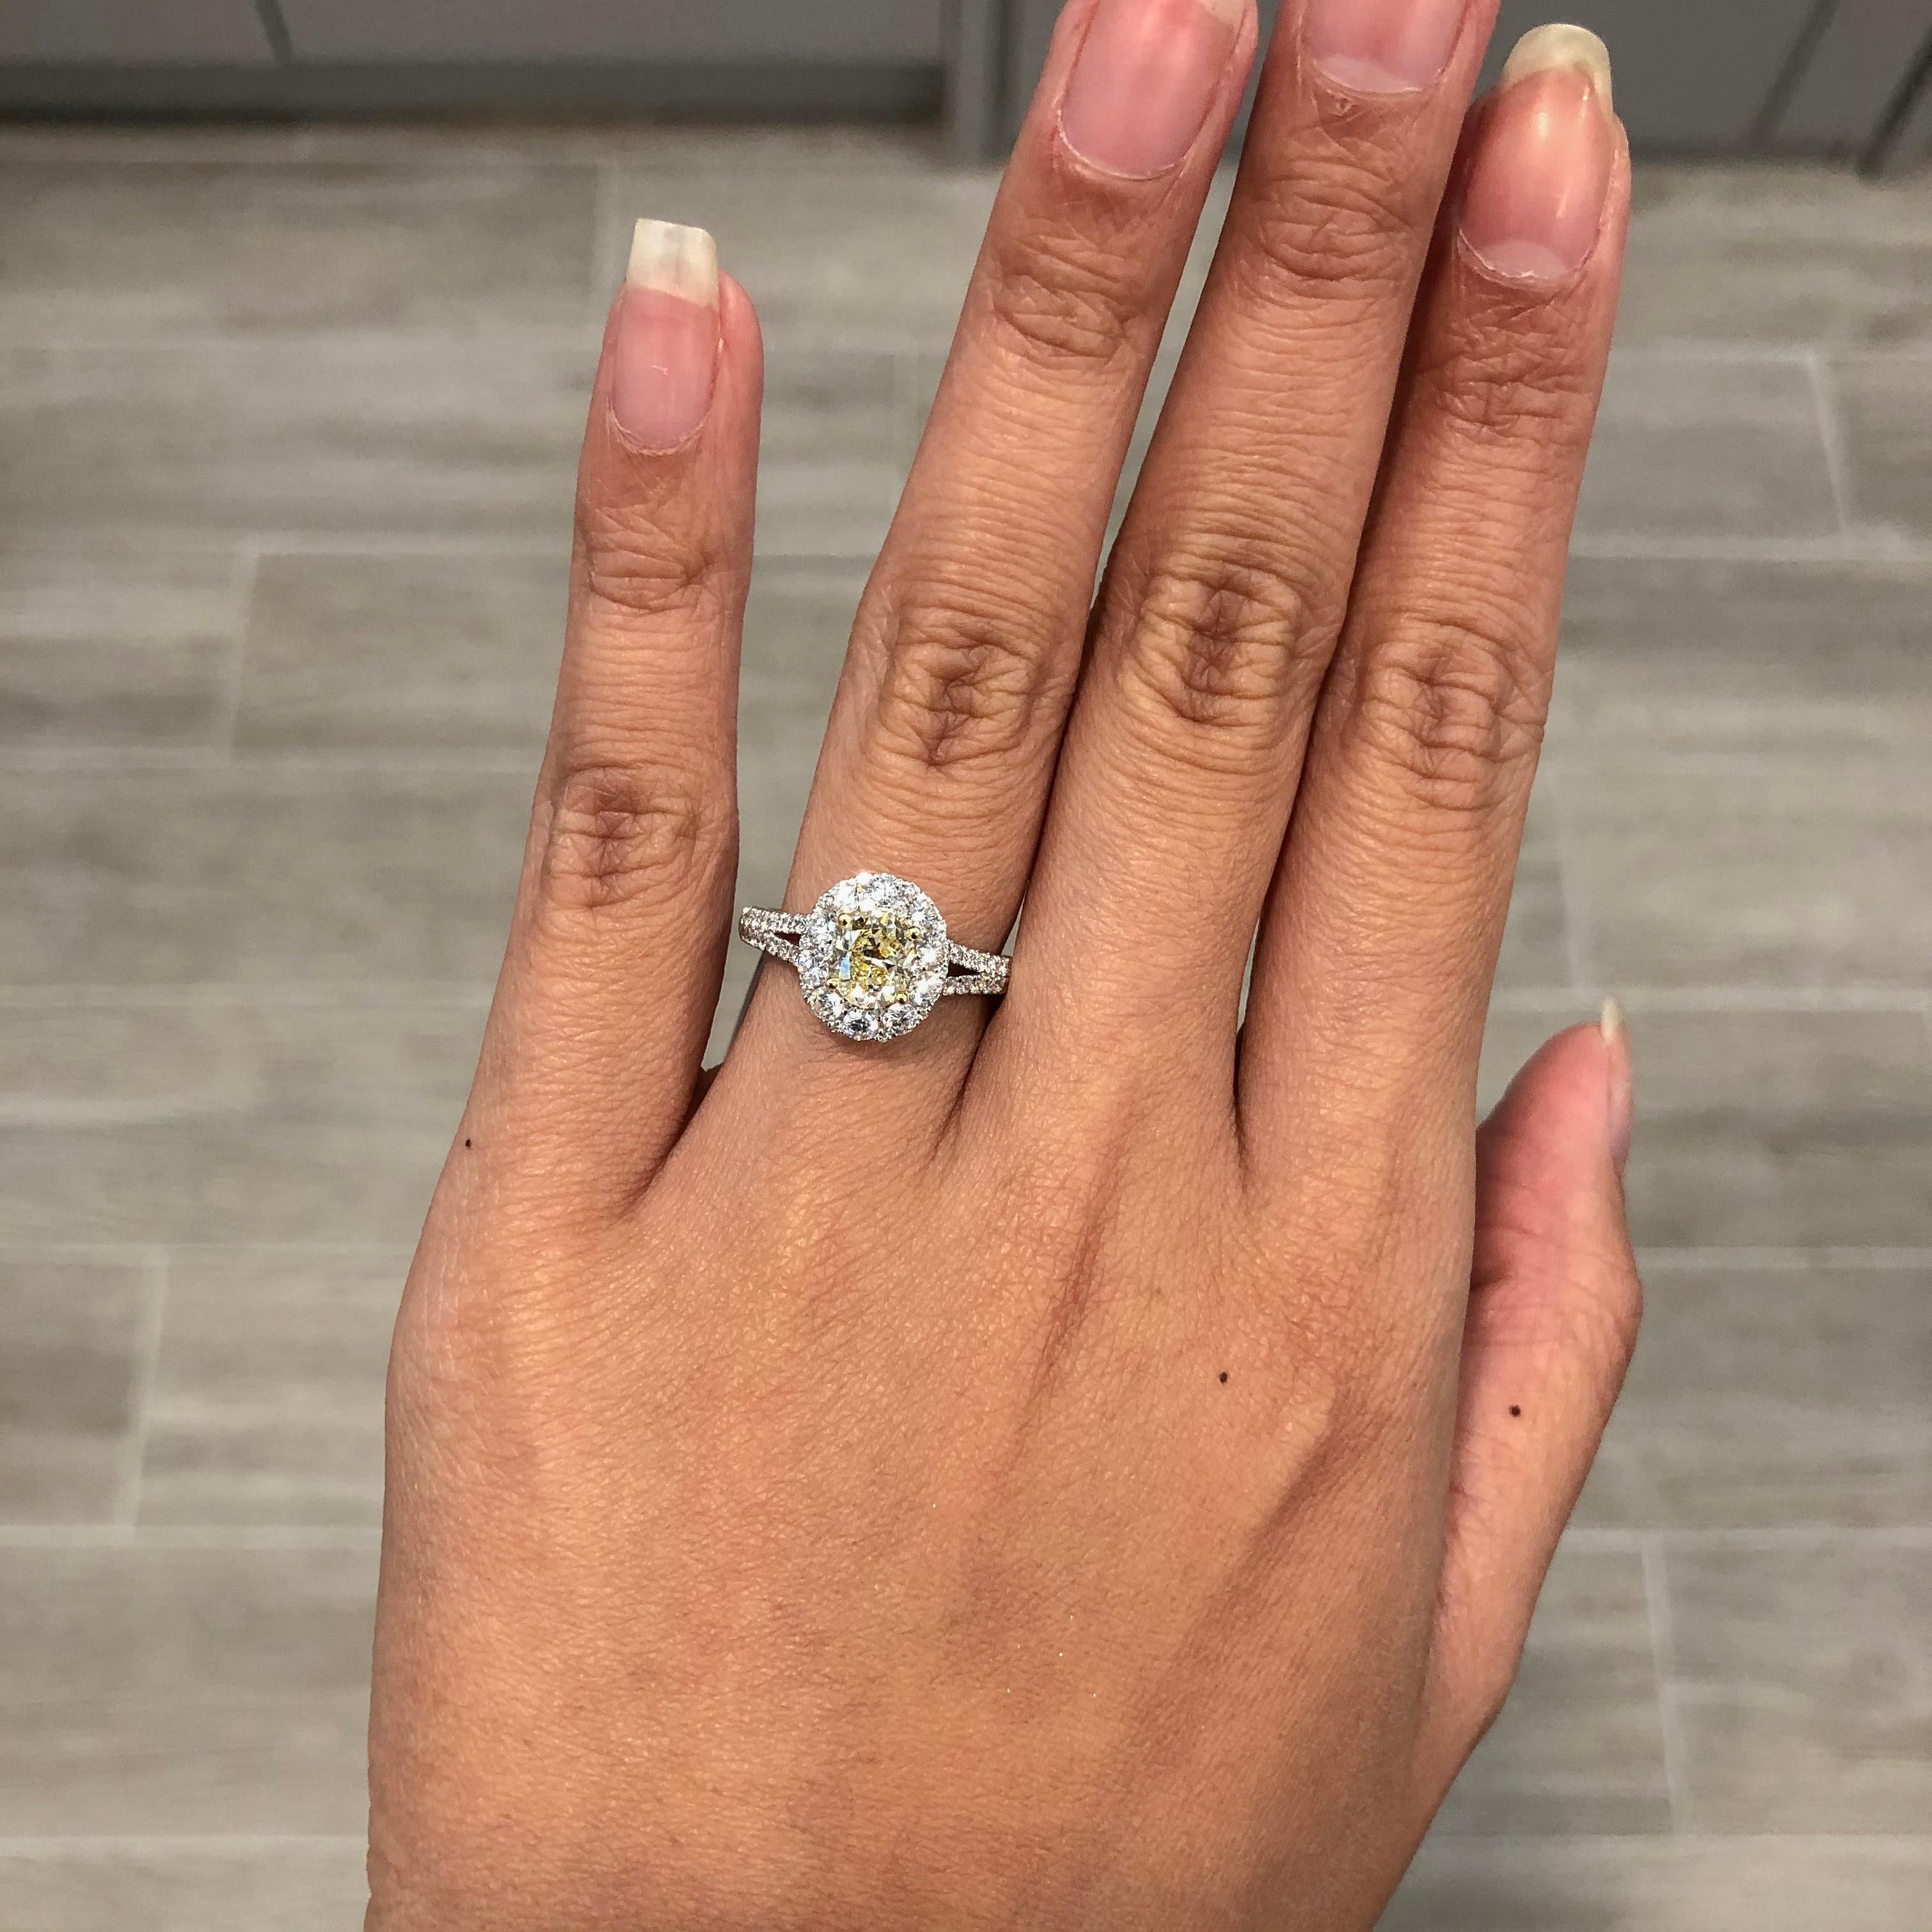 Showcasing an oval cut light yellow diamond center stone weighing 0.97 carats, surrounded by round brilliant diamonds. Set in a split-shank setting accented with round brilliant diamonds. Diamonds weigh 0.89 carats total. Made in 18 karat white